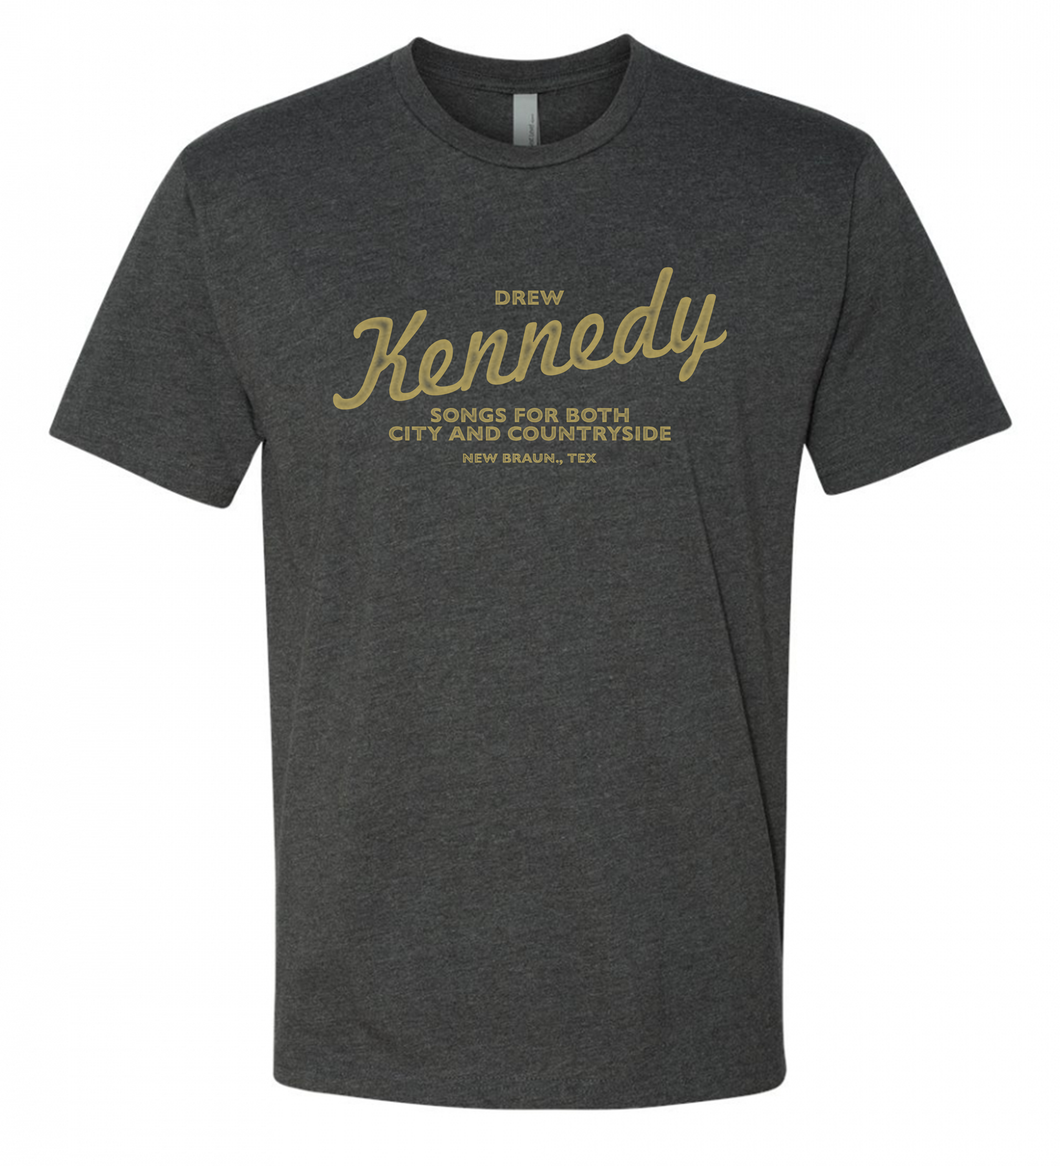 KENNEDY (Additional Colors)